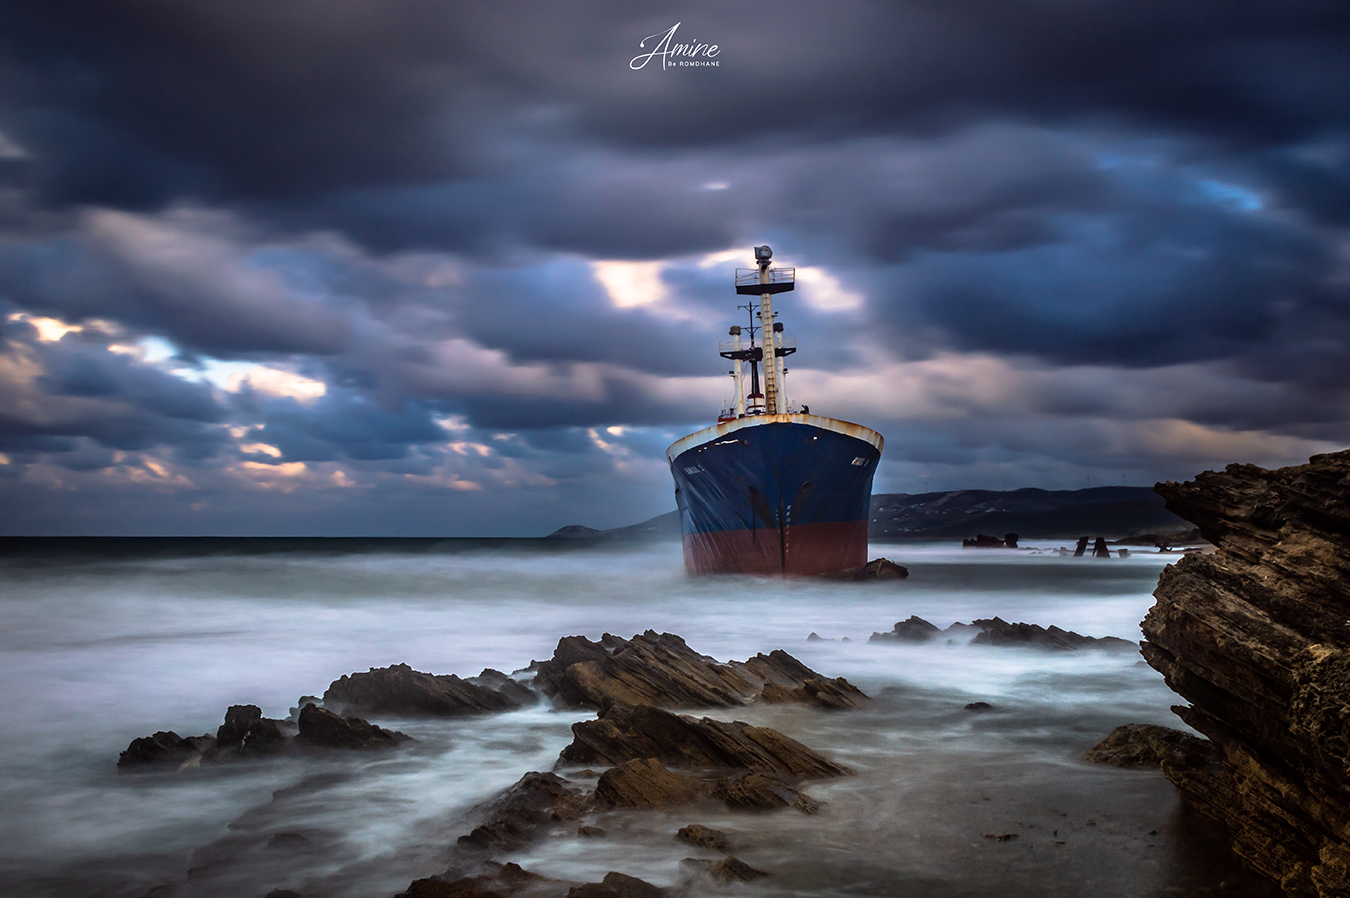 Wreck of HAMADA S cargo ship in a stormy day by Amine Be Romdhane